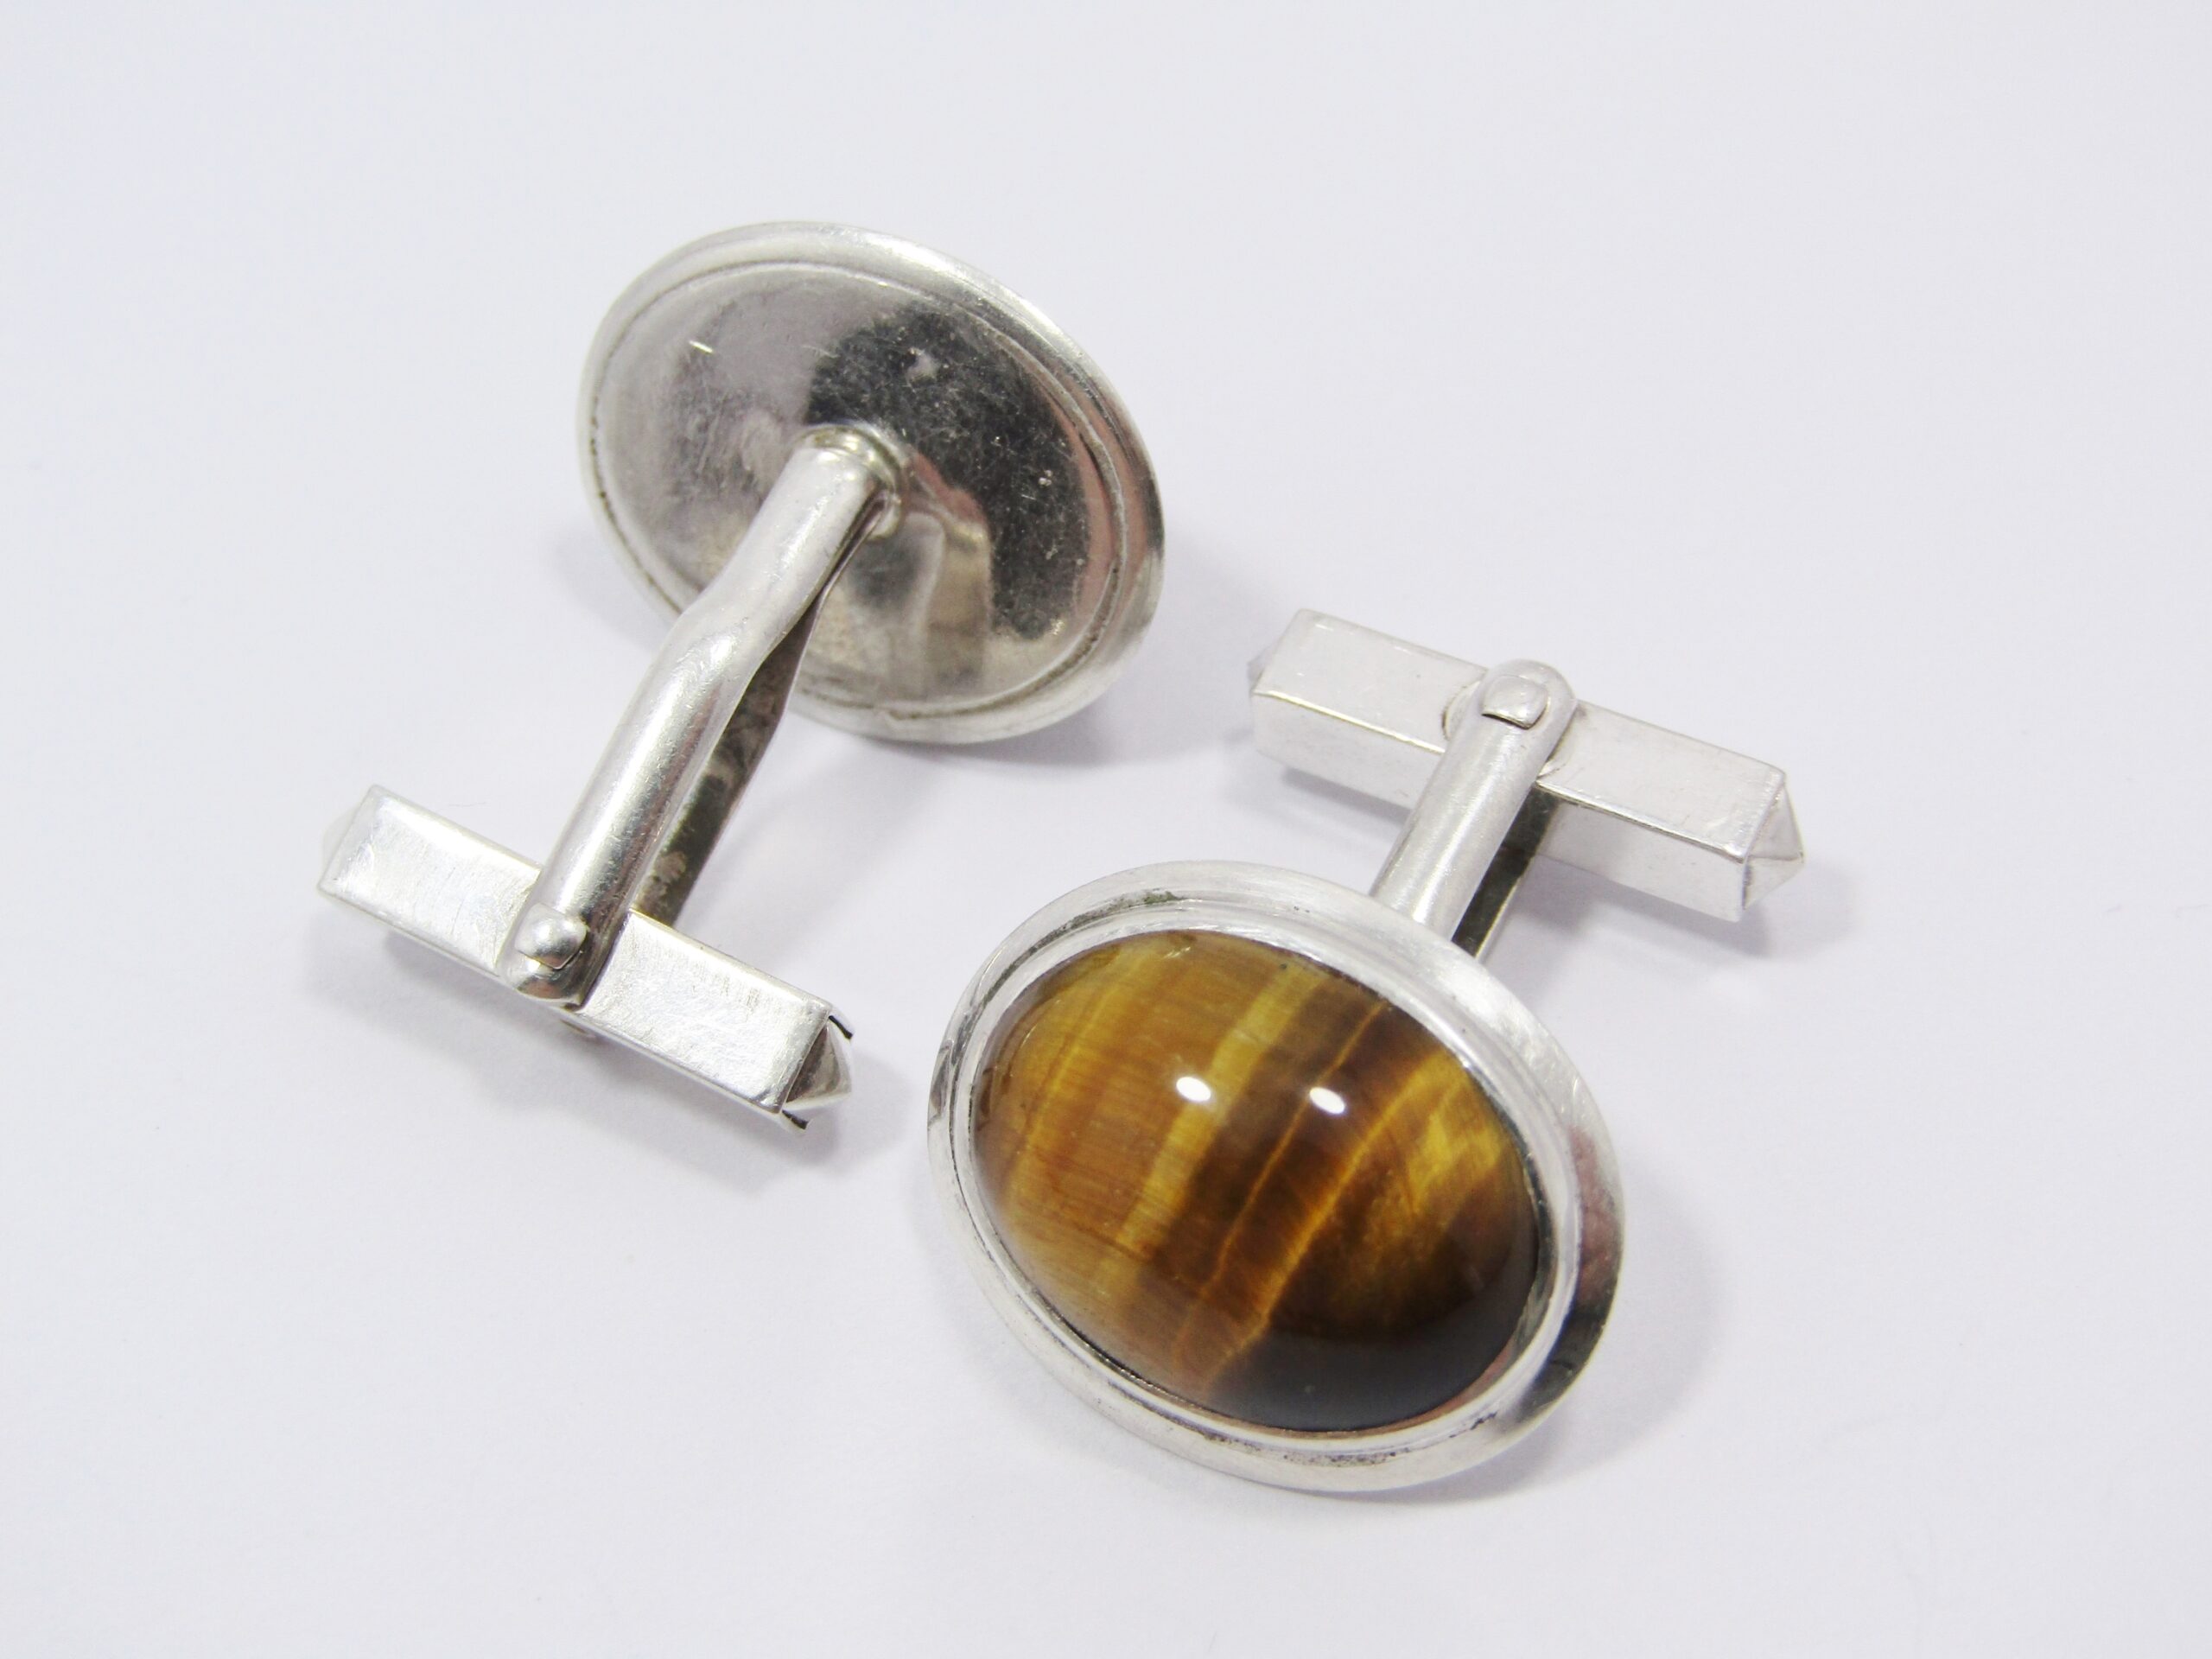 A Gorgeous Pair of Tyger’s Eye Cuff Links in Sterling Silver